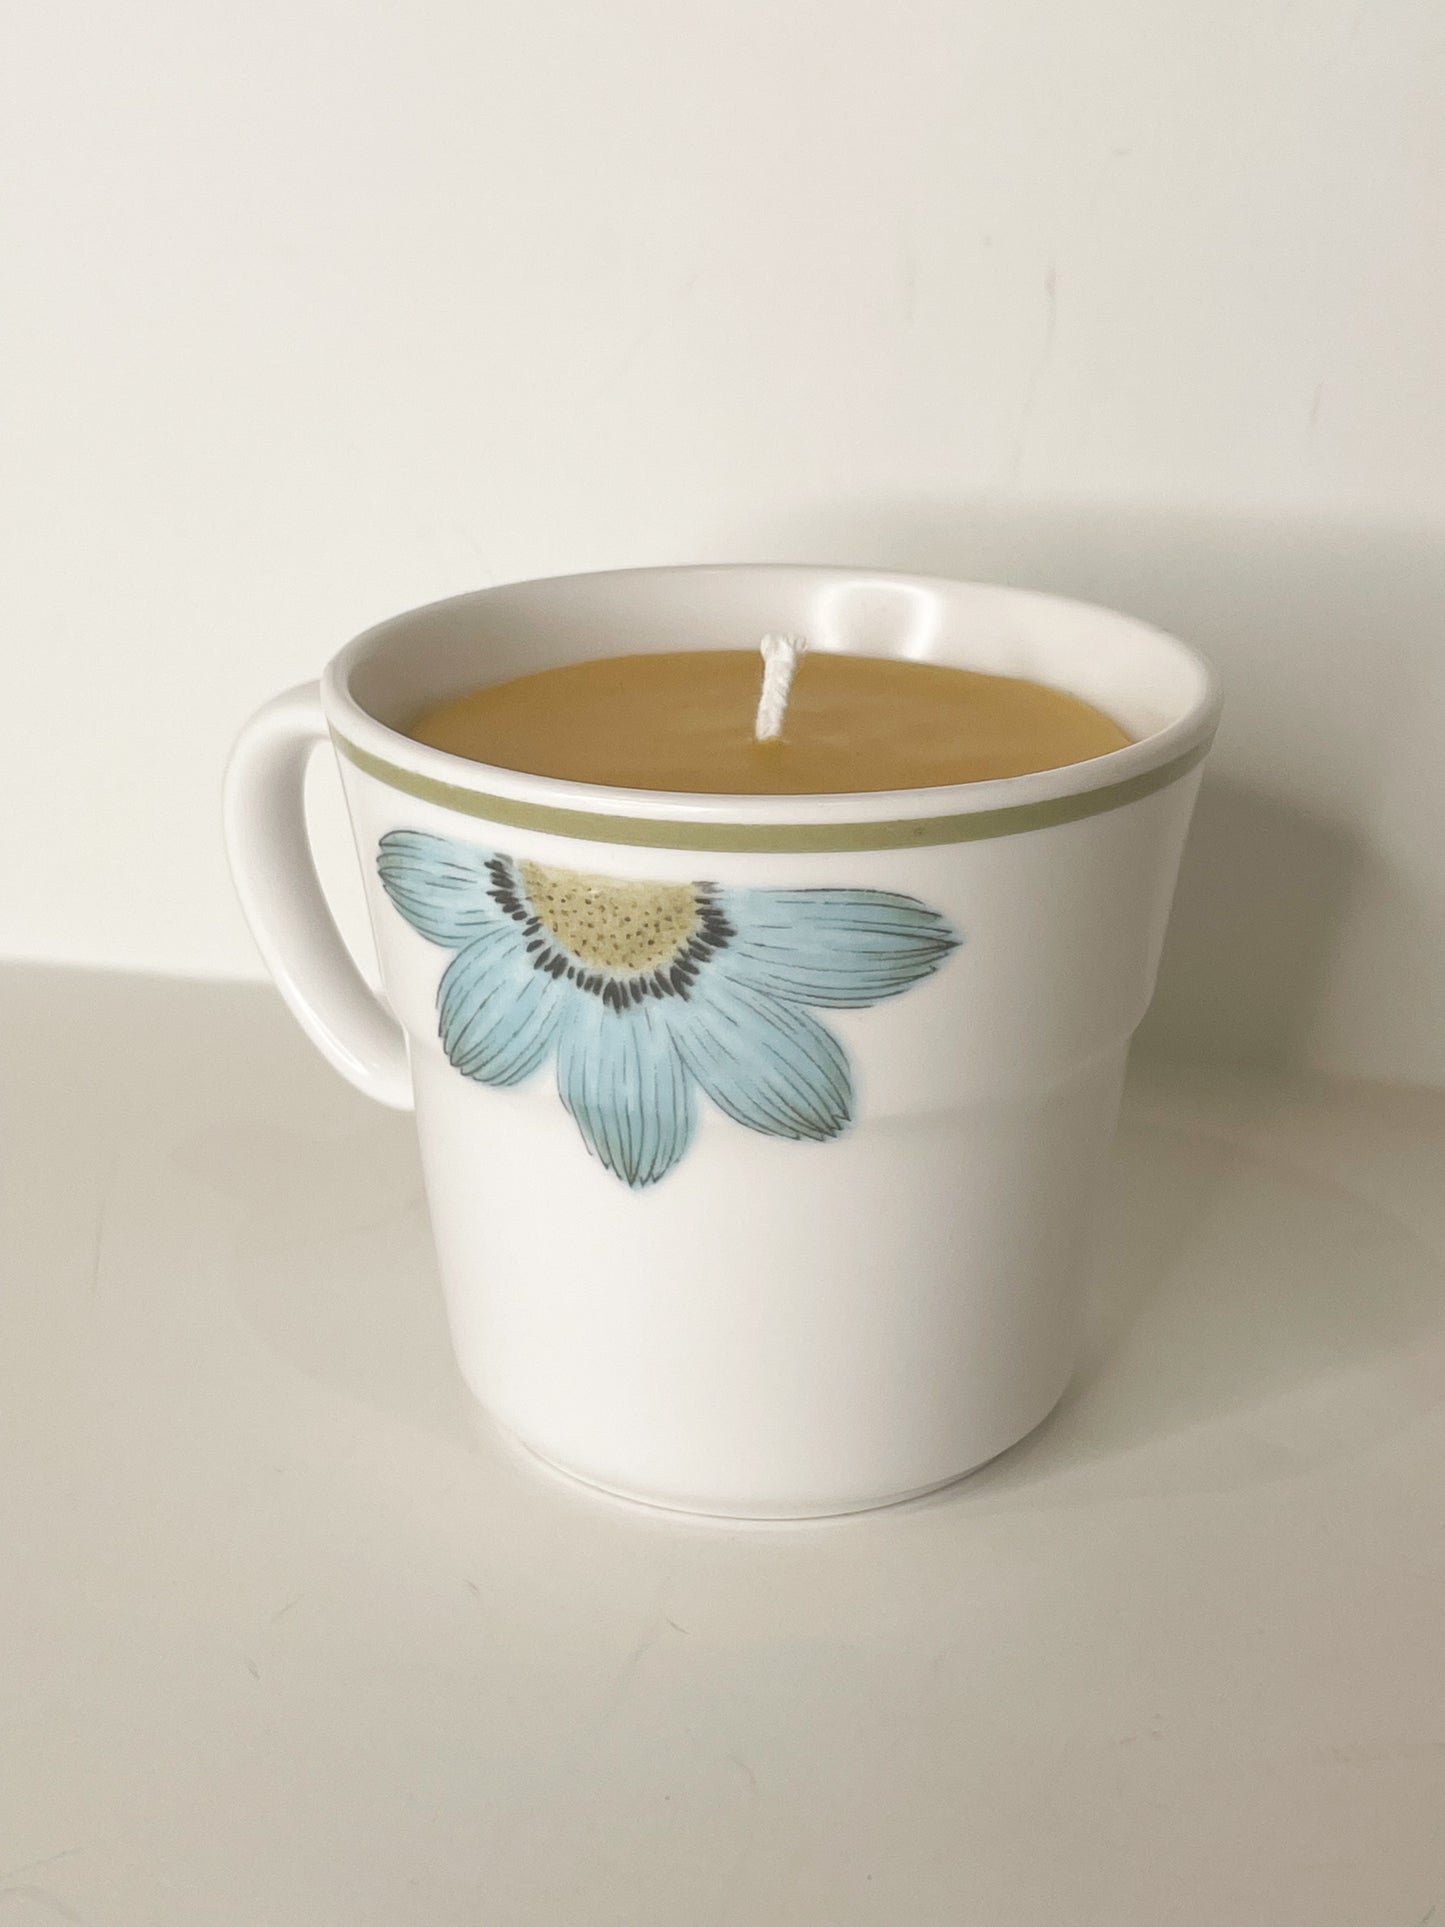 Noritake Blue Flower 100% Beeswax Upcycled Mug Candle - Clarity Floral Citrus Scent